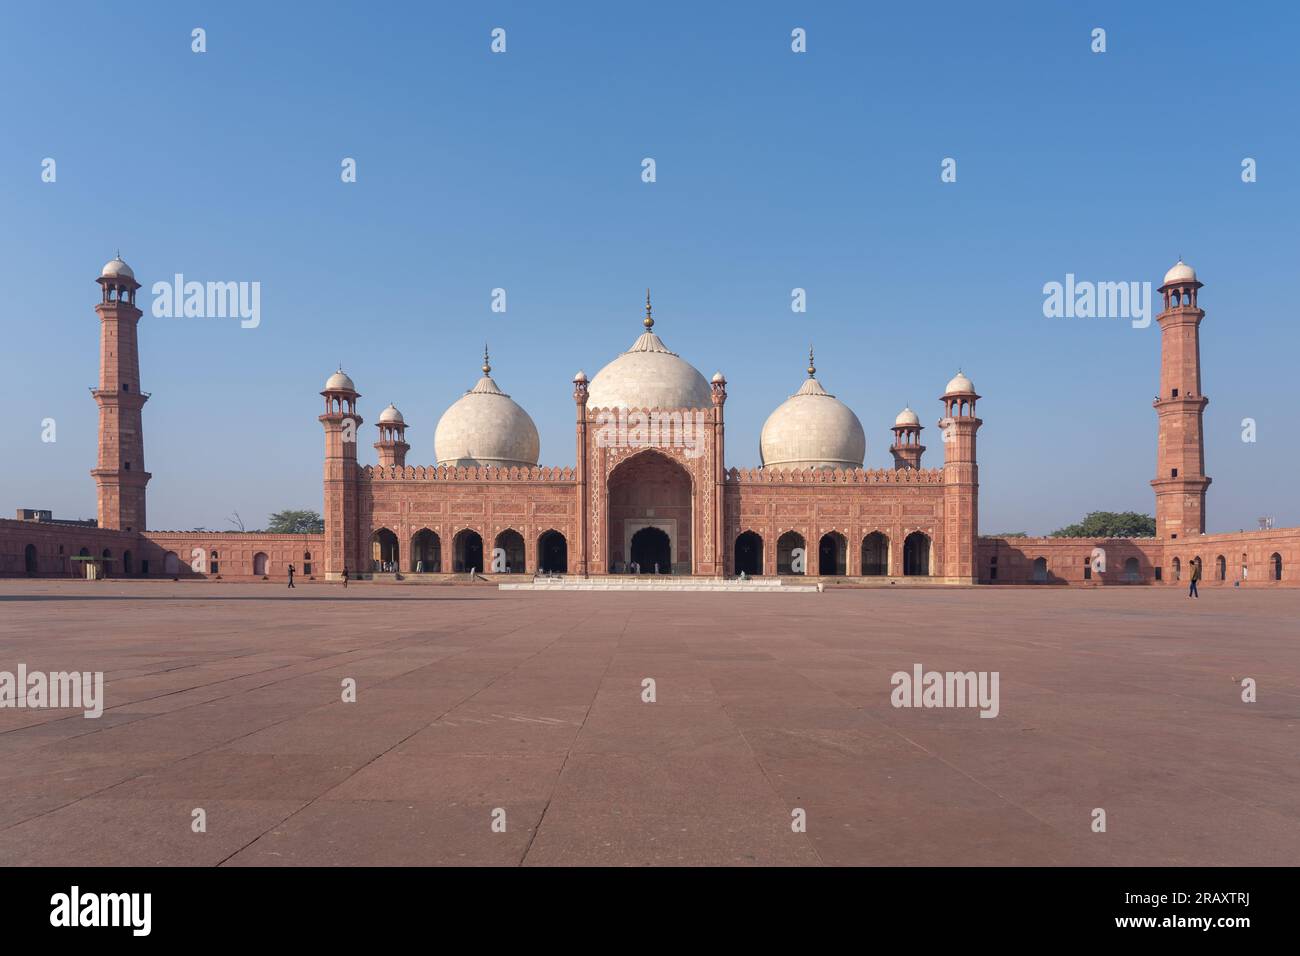 Front view of beautiful ancient Badshahi mosque with courtyard built by mughal emperor Aurangzeb a landmark of Lahore, Punjab, Pakistan Stock Photo